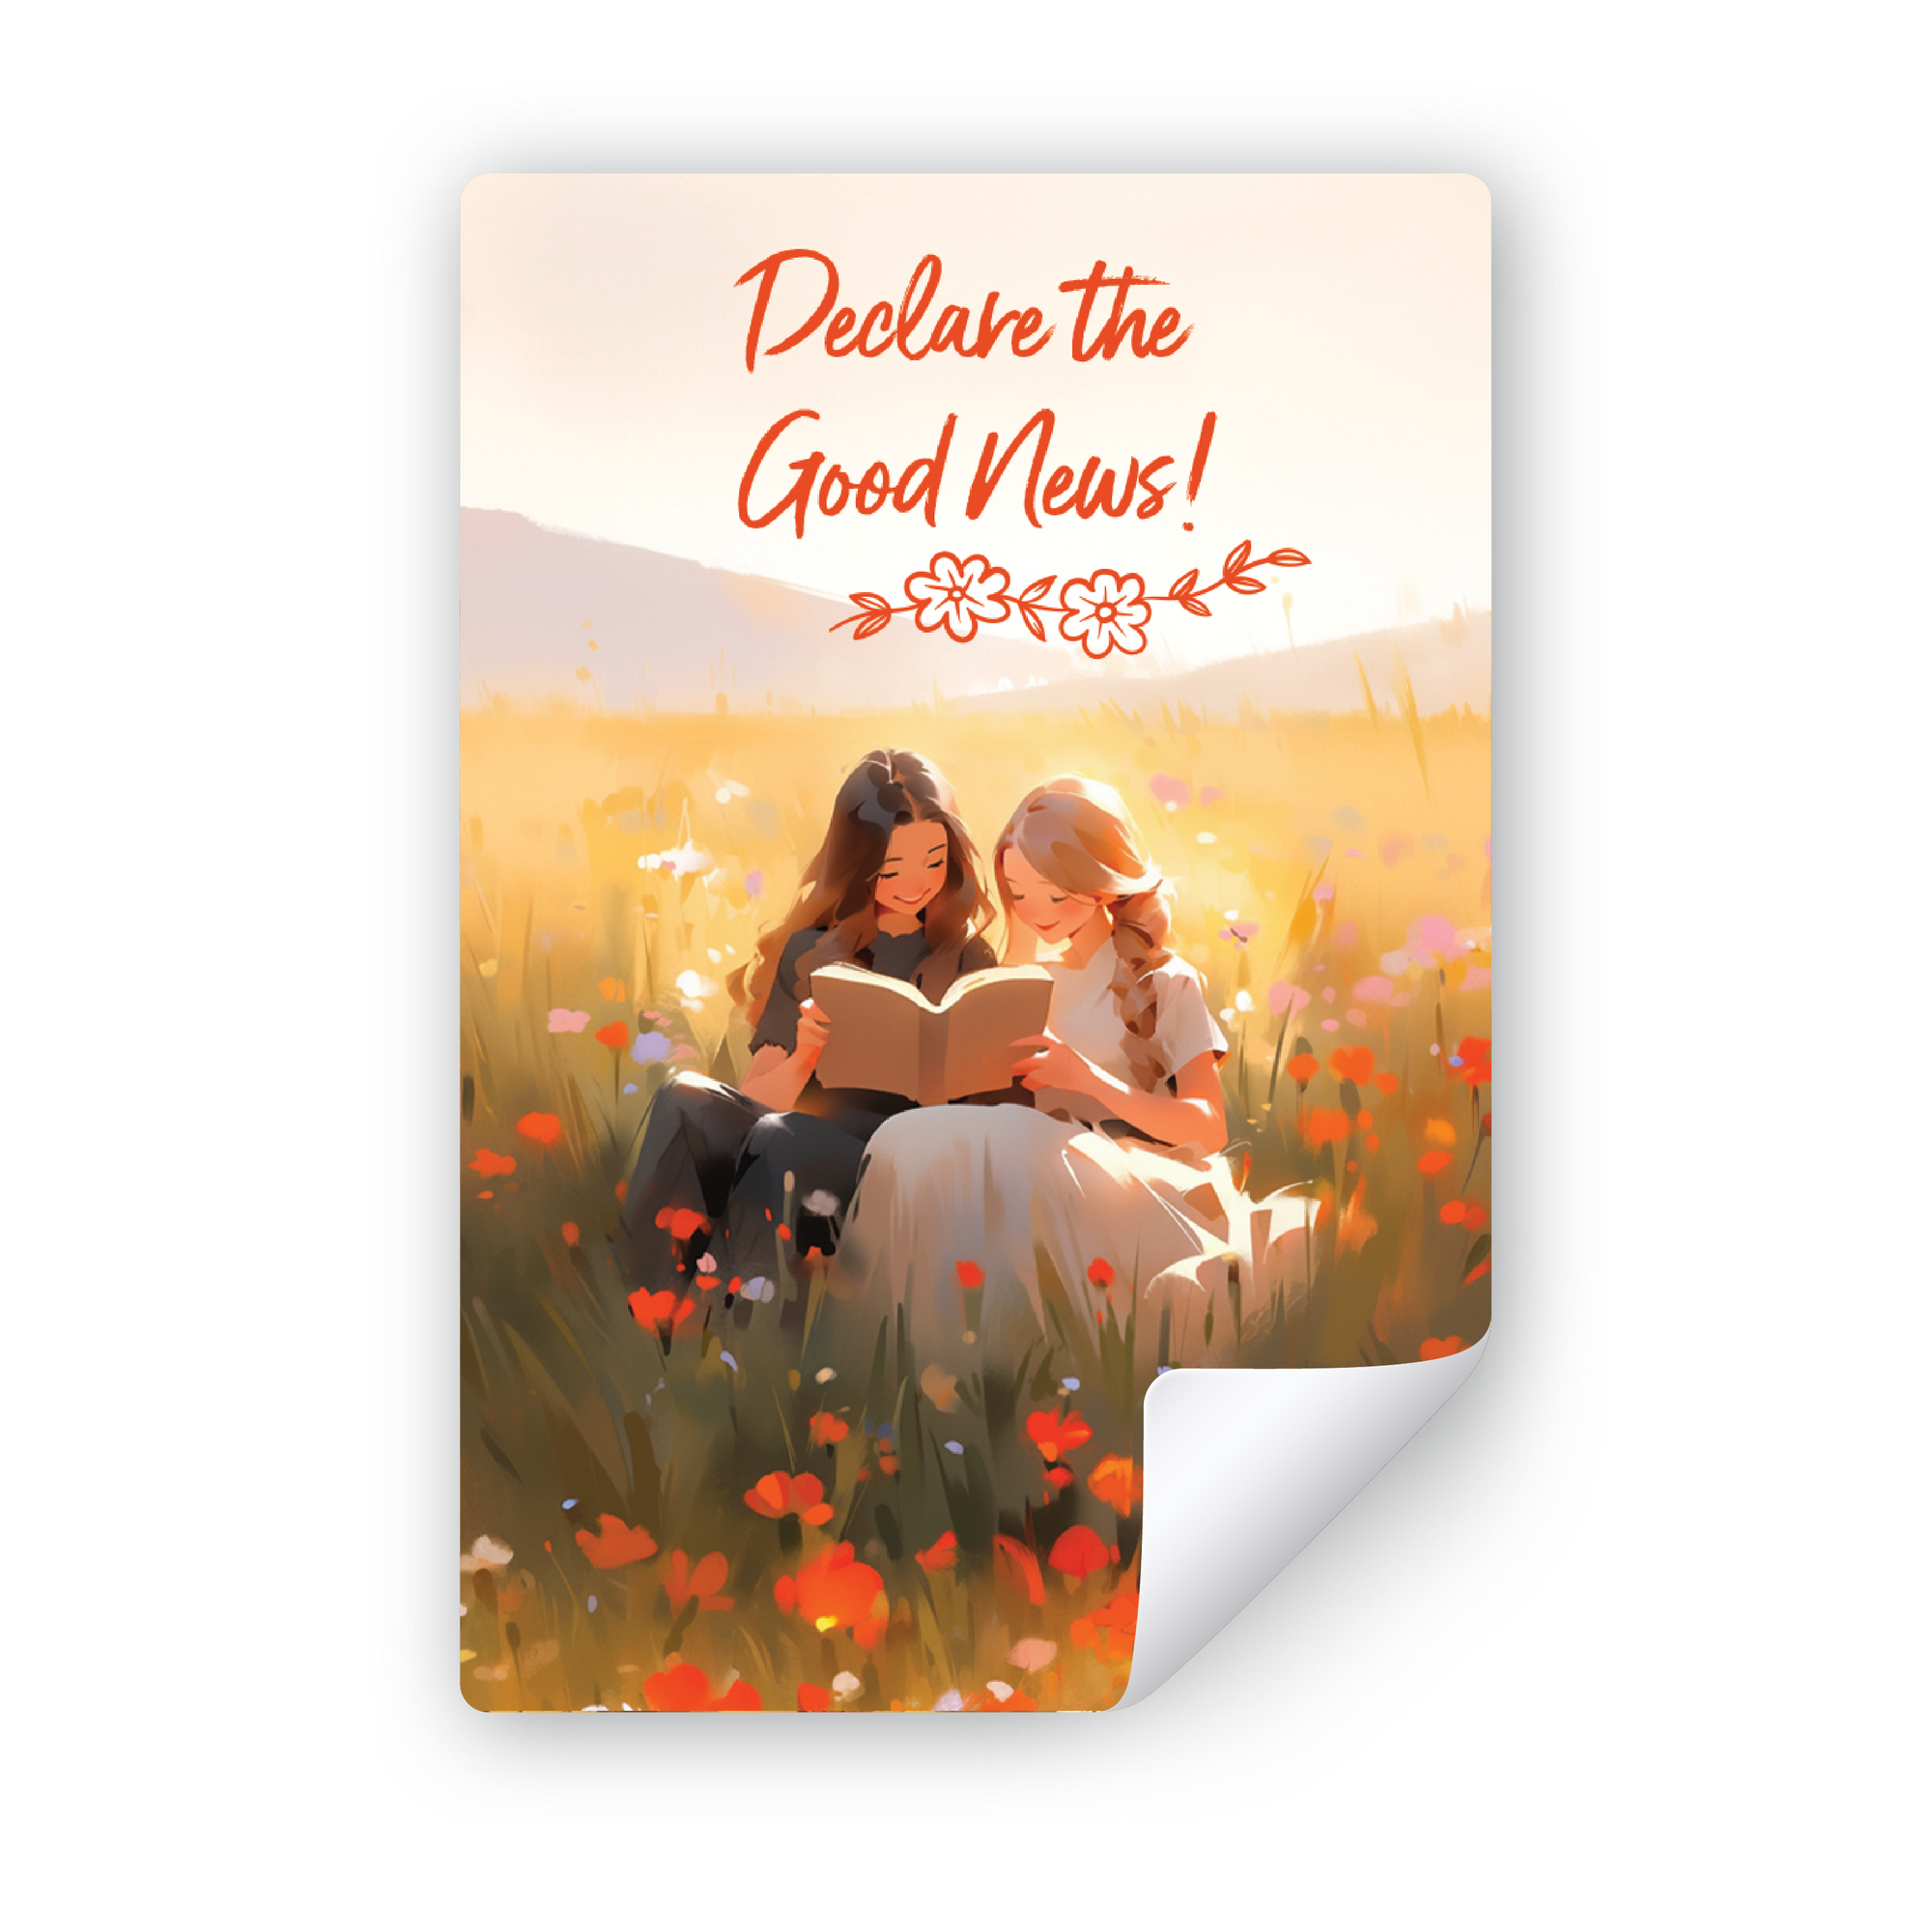 Sticker for "Declare the Good News" Convention - Flower Field